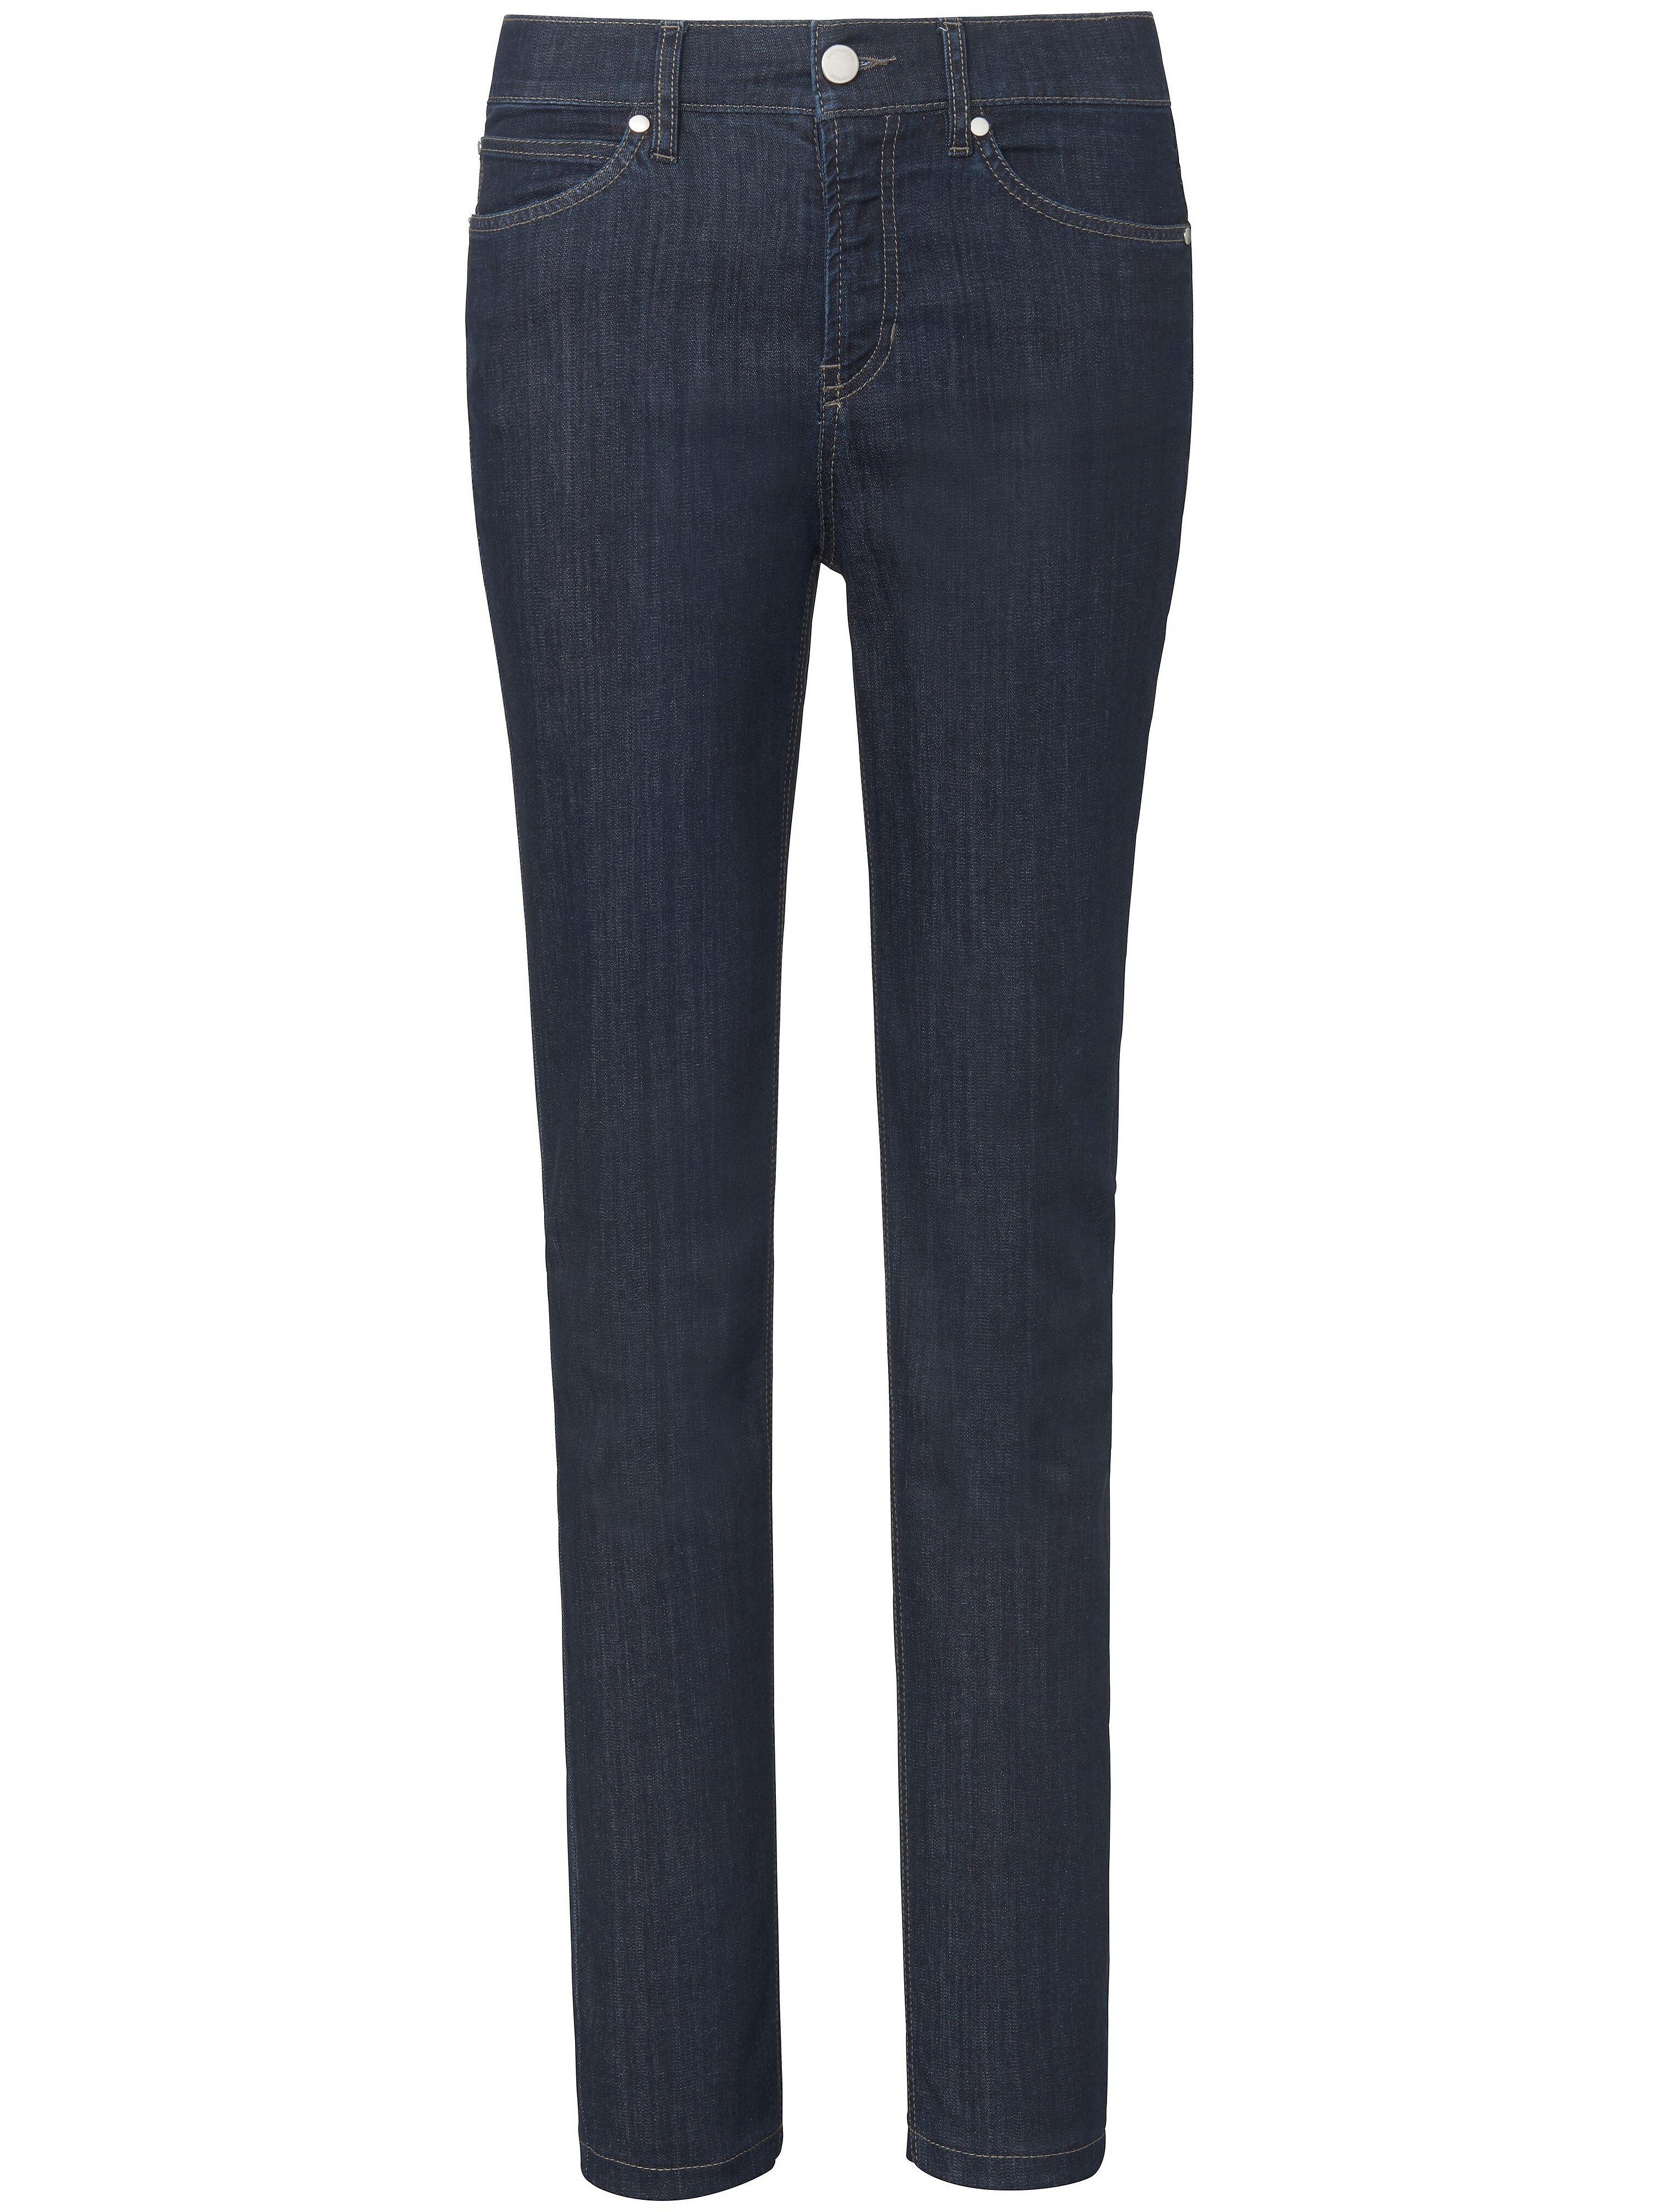 Le jean coupe 5 poches  Fadenmeister Berlin denim taille 48